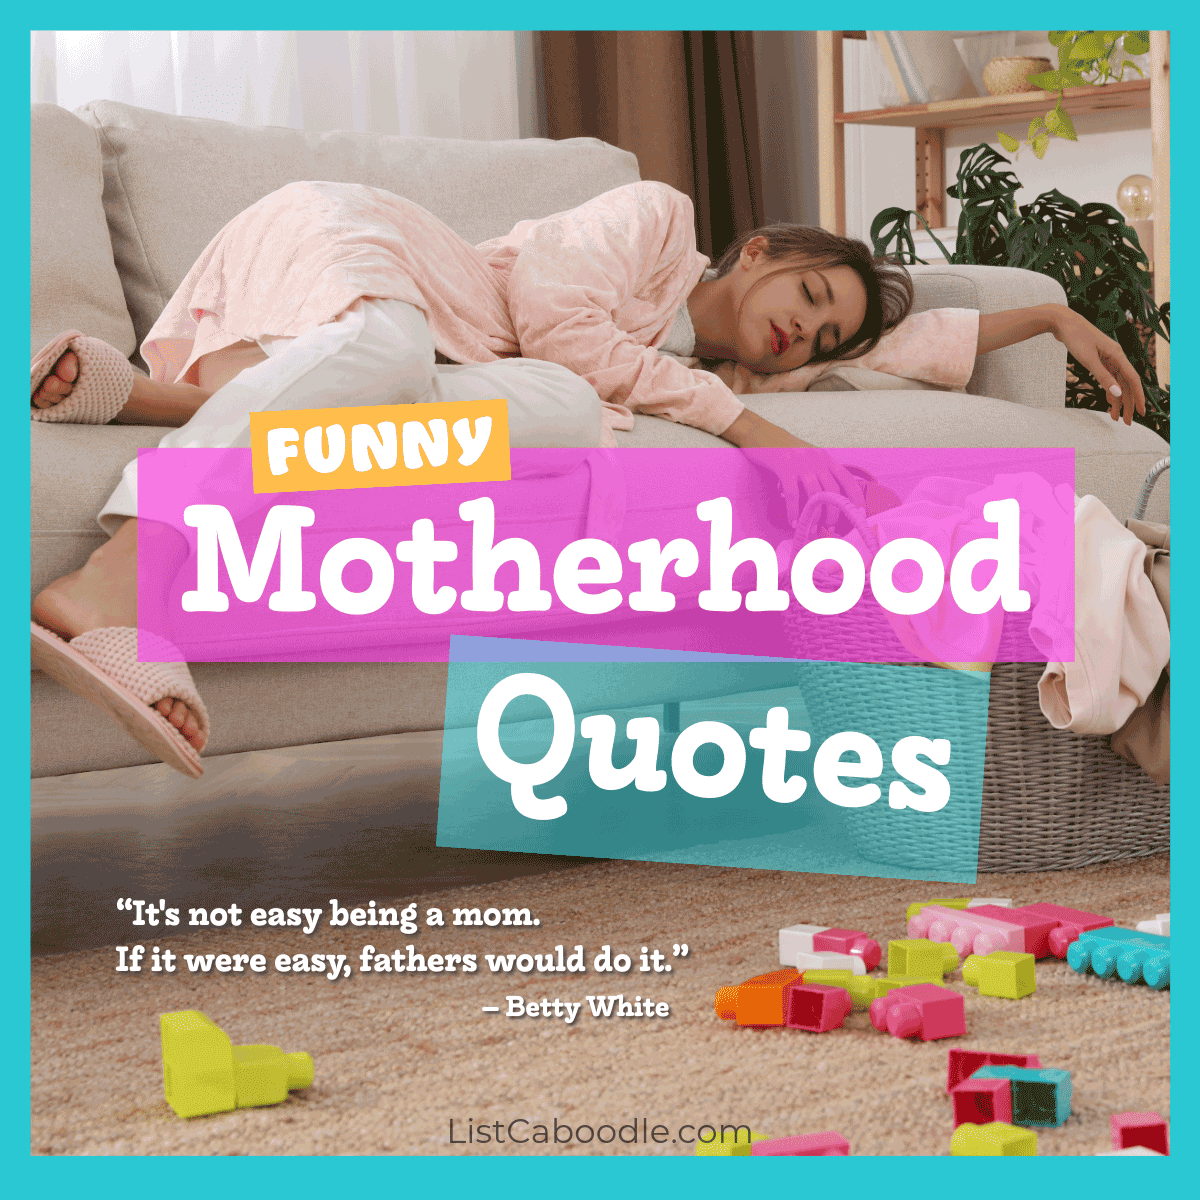 Funny motherhood quotes